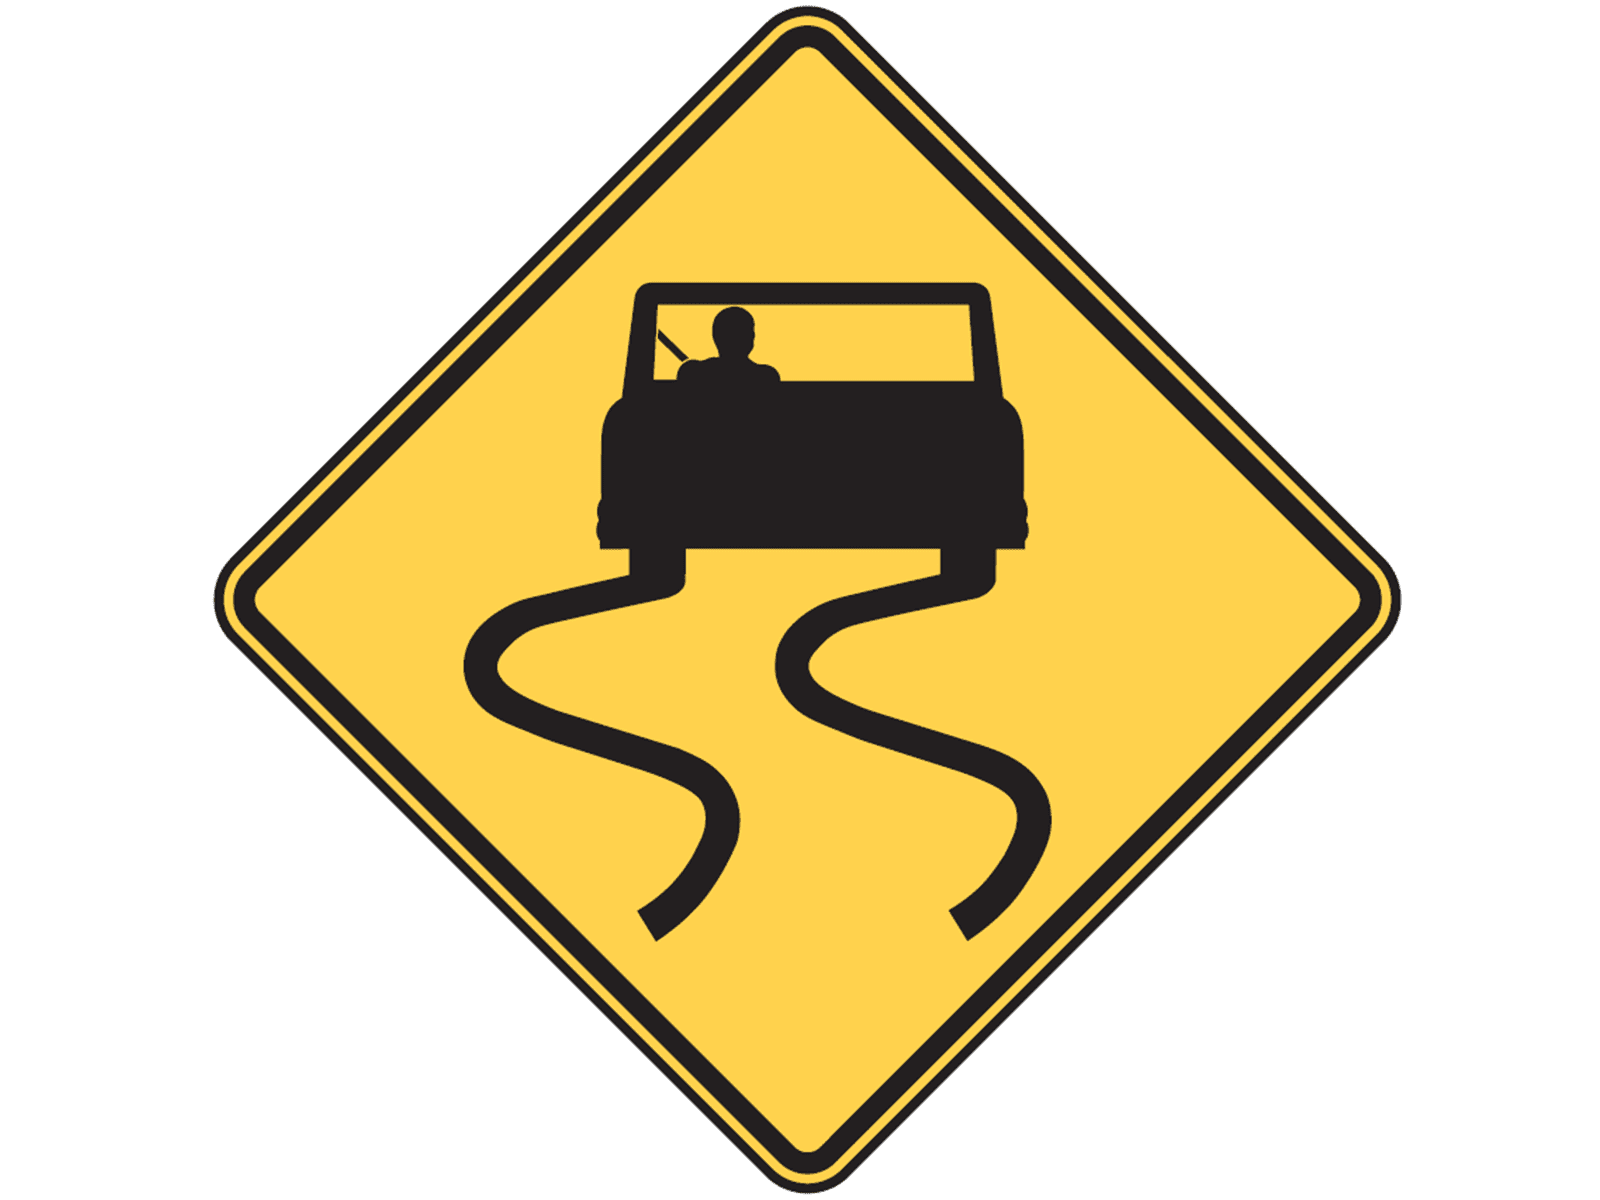 Slippery When Wet W8-5 - W8: Pavement and Roadway Conditions